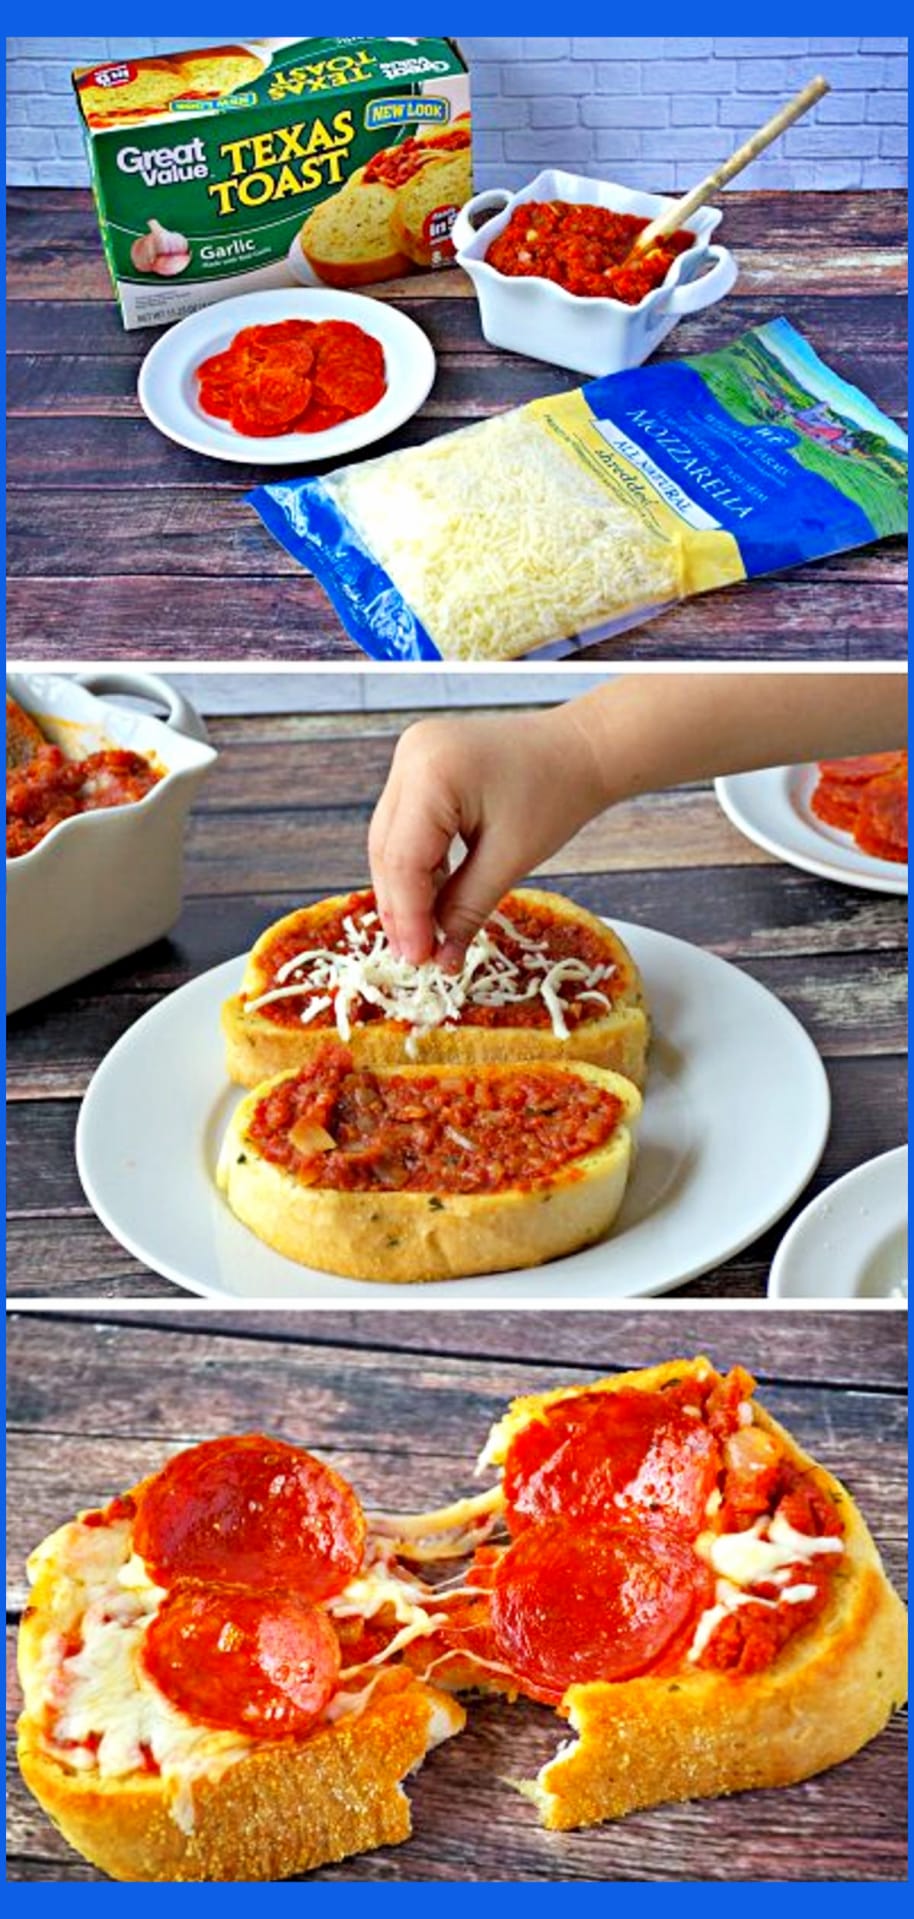 Recipes for Kids - fun and easy recipes for kids to make - easy pizza recipe for kids to cook - quick snacks for kids - simple pepperoni pizza recipe for kids lunch ideas, snacks or for families ideas for dinner tonight